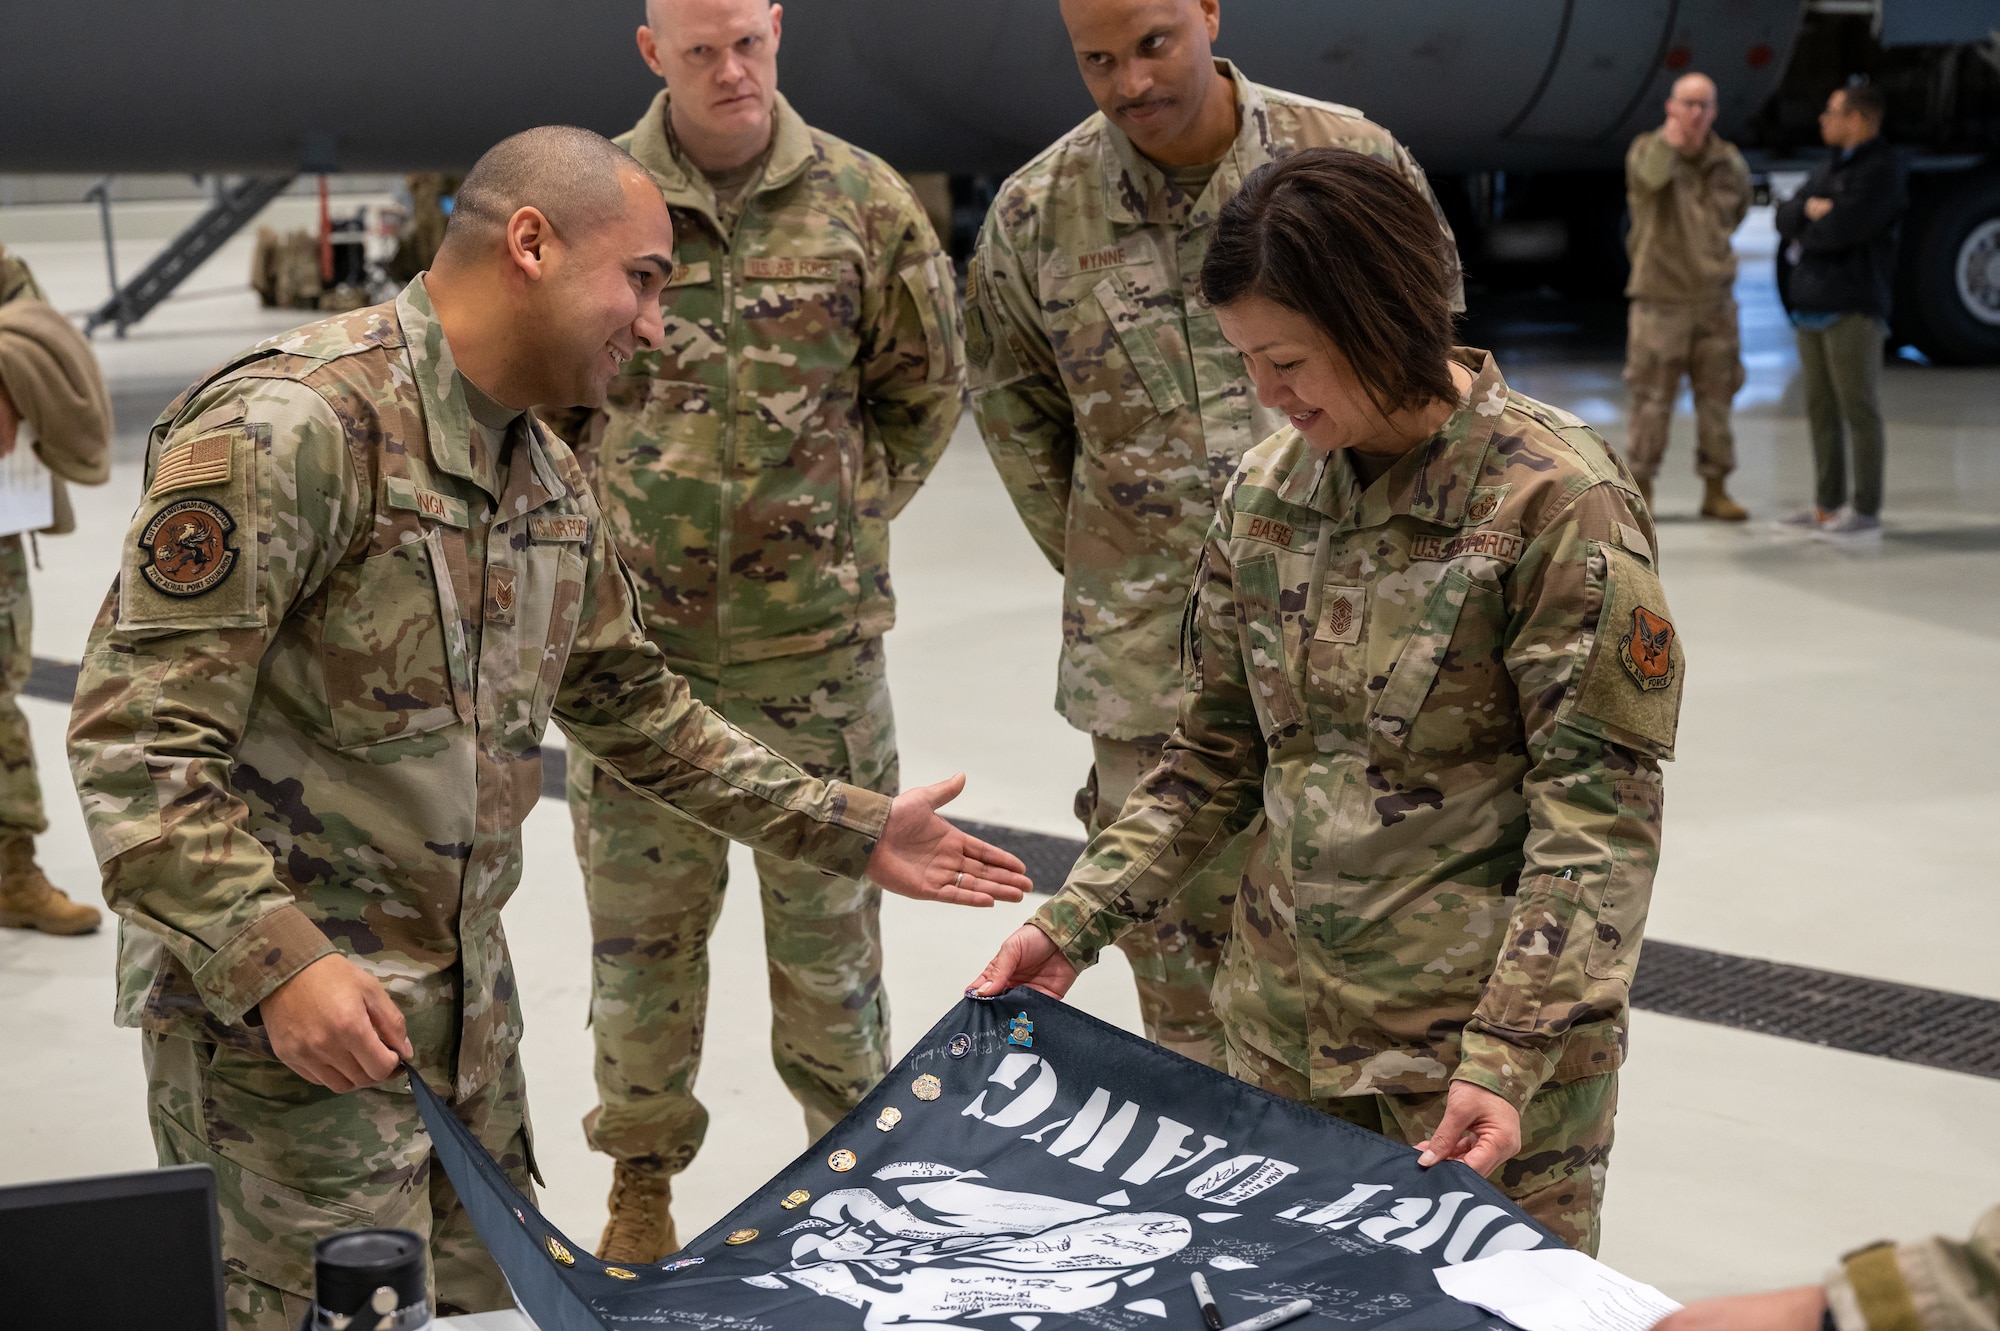 A group of military members standing around a flag.